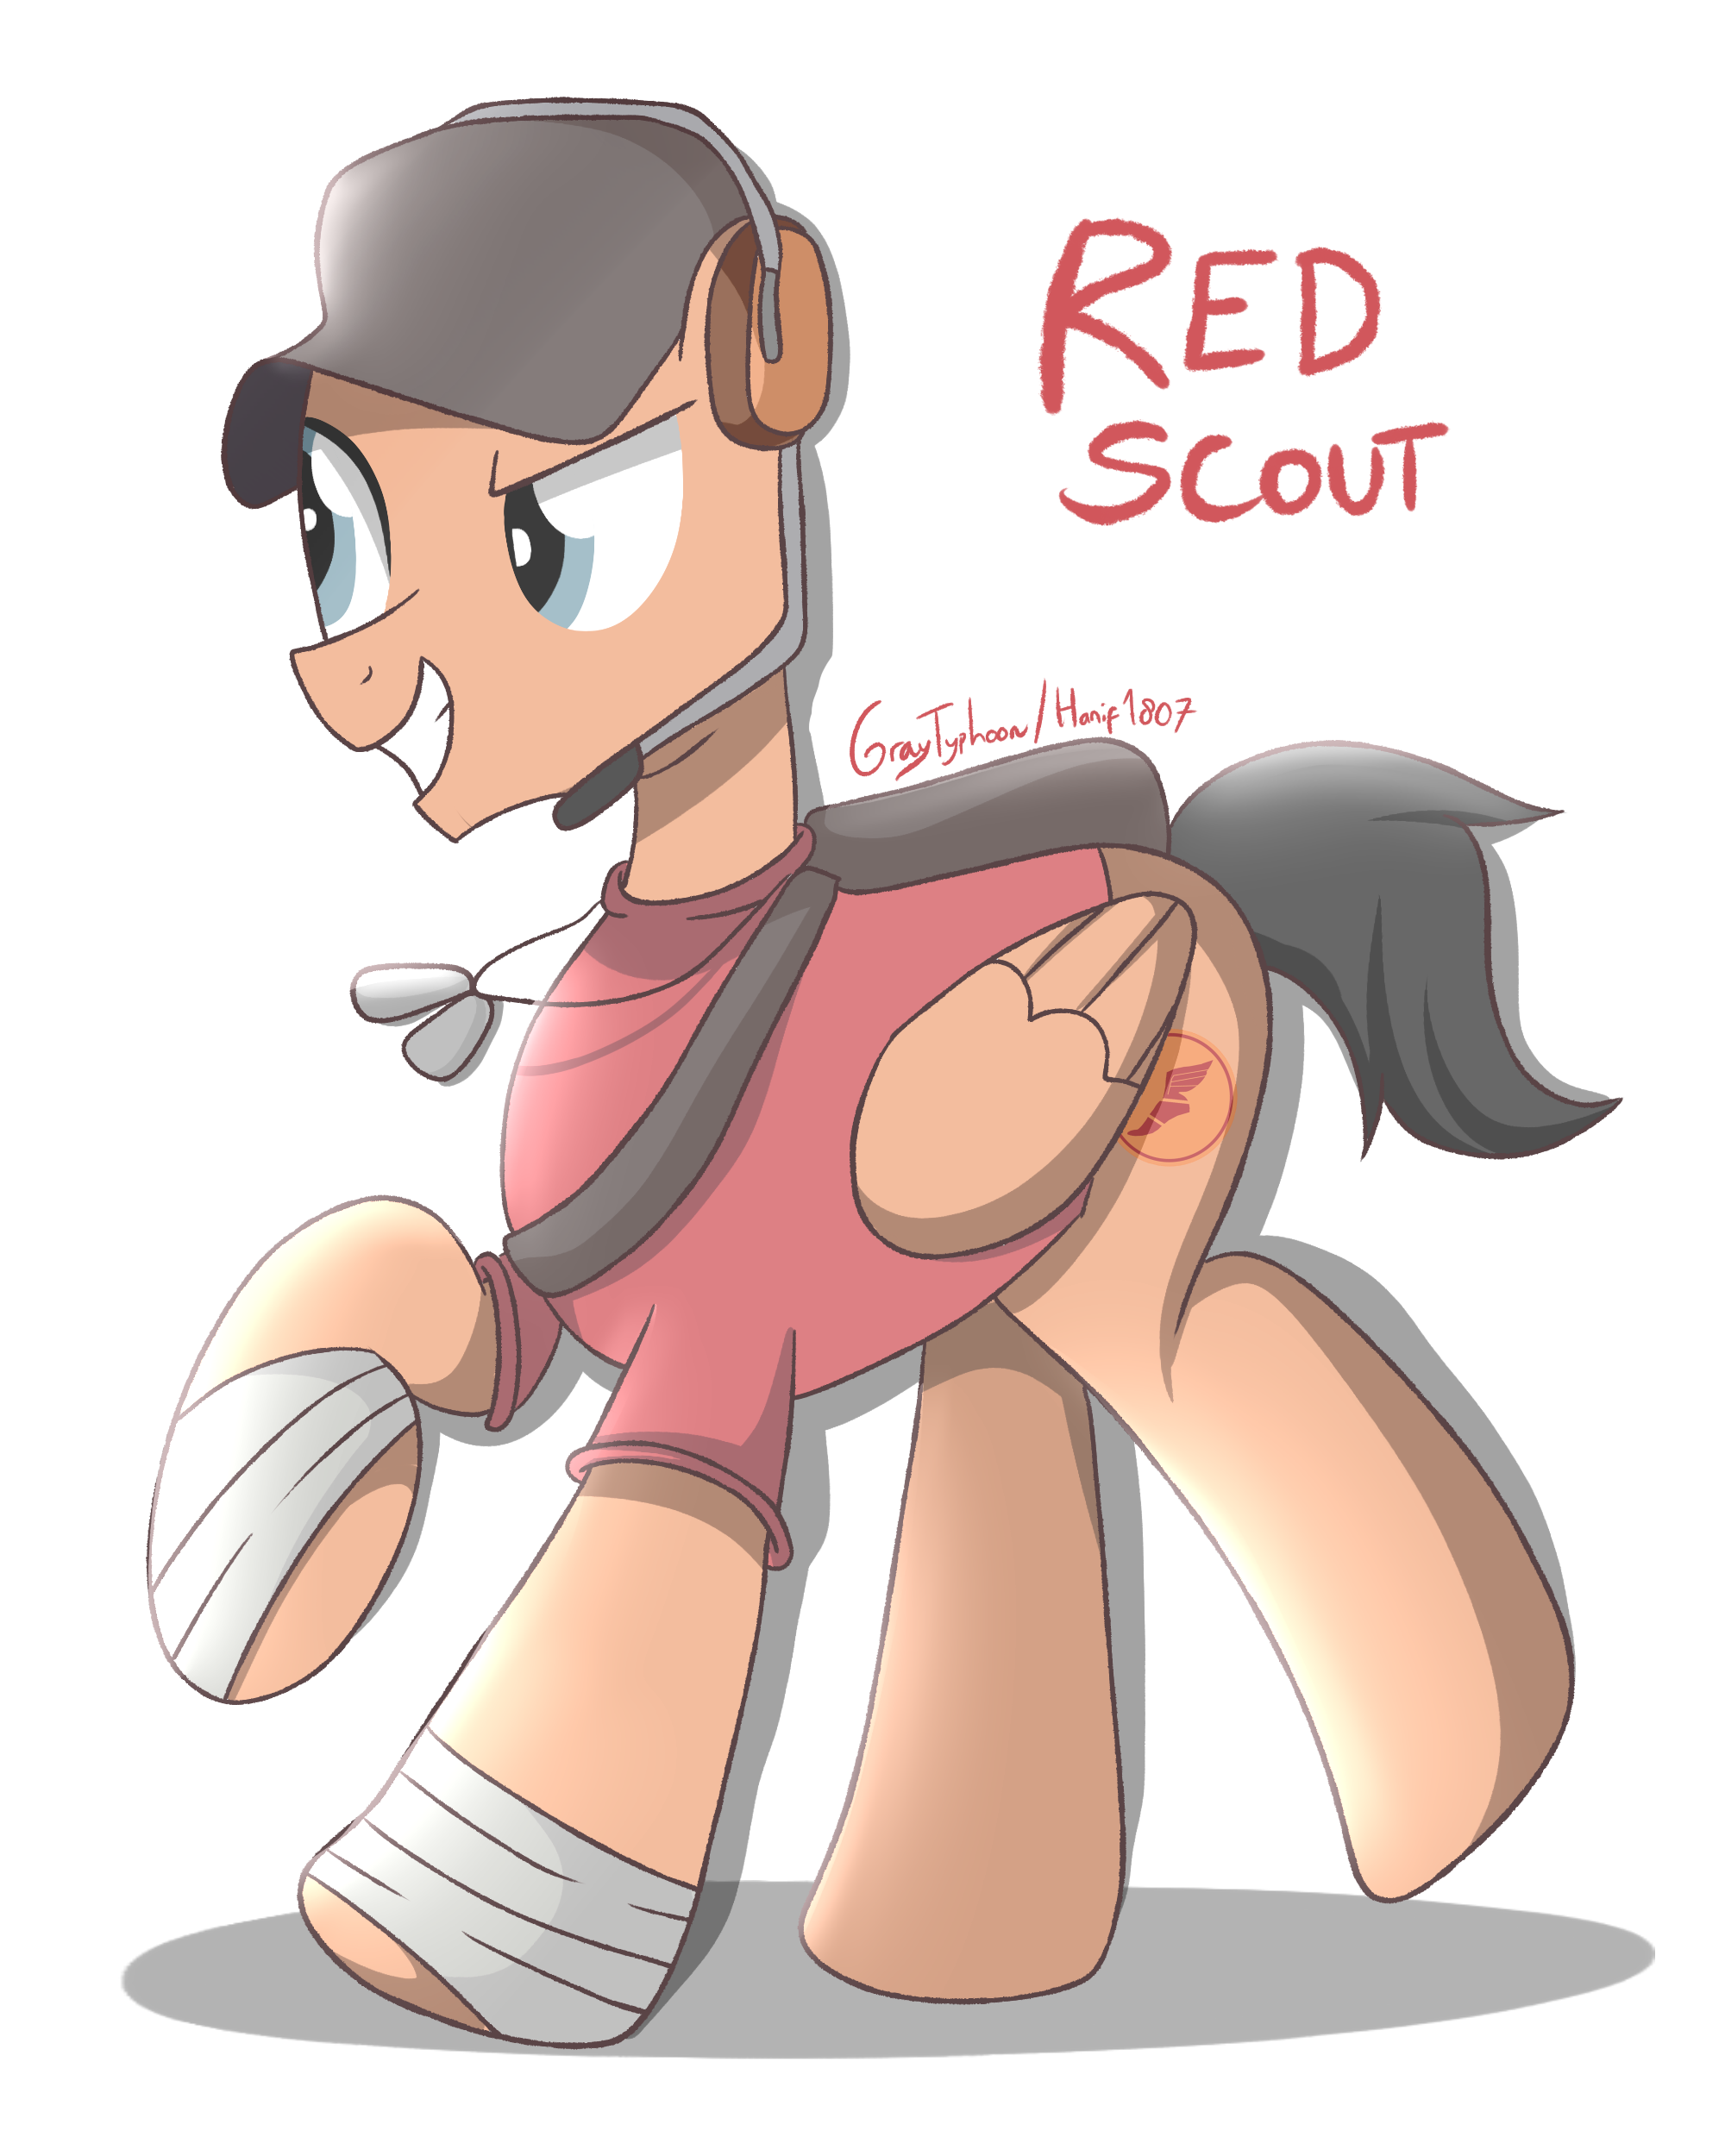 ponified_red_scout_by_graytyphoon-dbr8yx